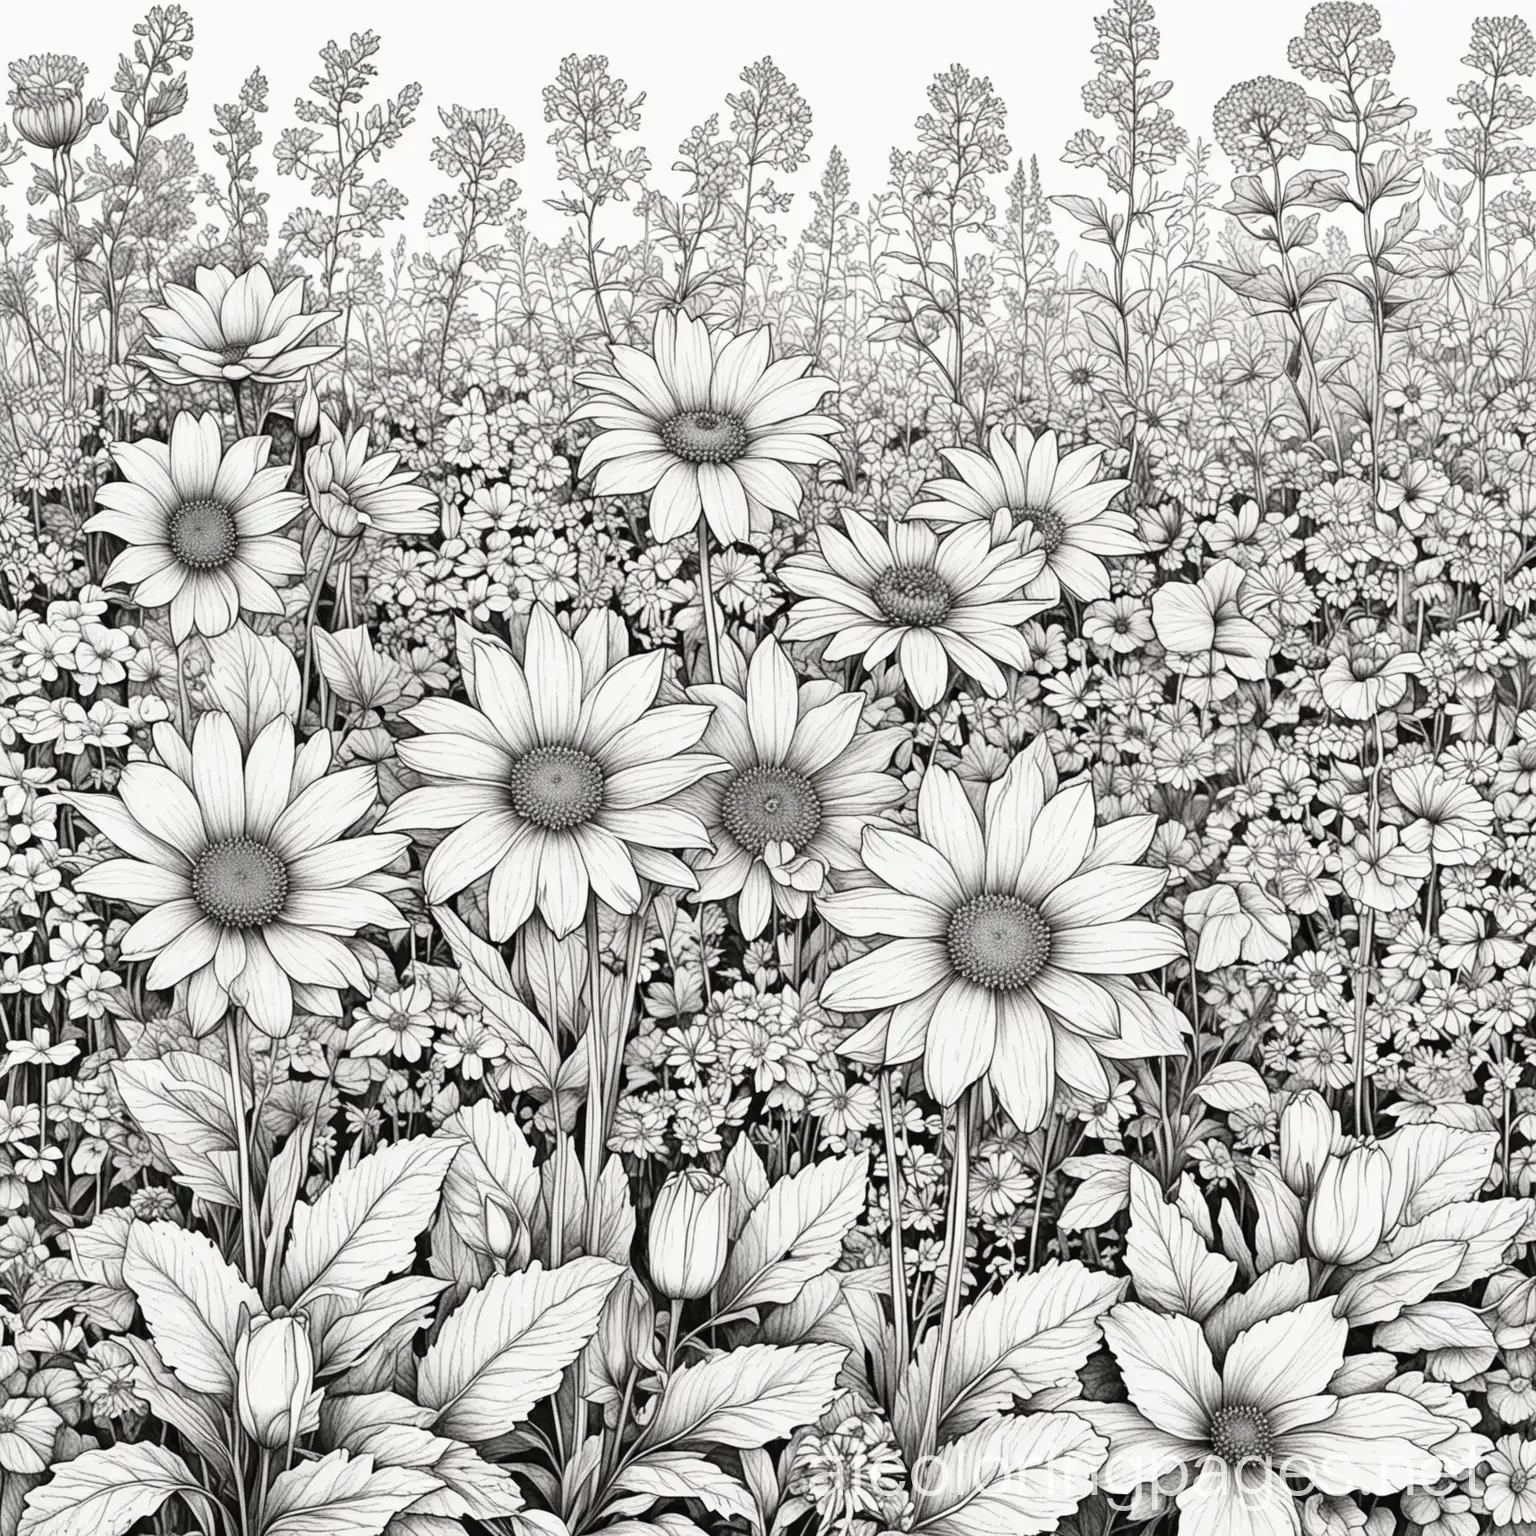 Flowers-in-the-Garden-Coloring-Page-Simple-Black-and-White-Line-Art-on-White-Background